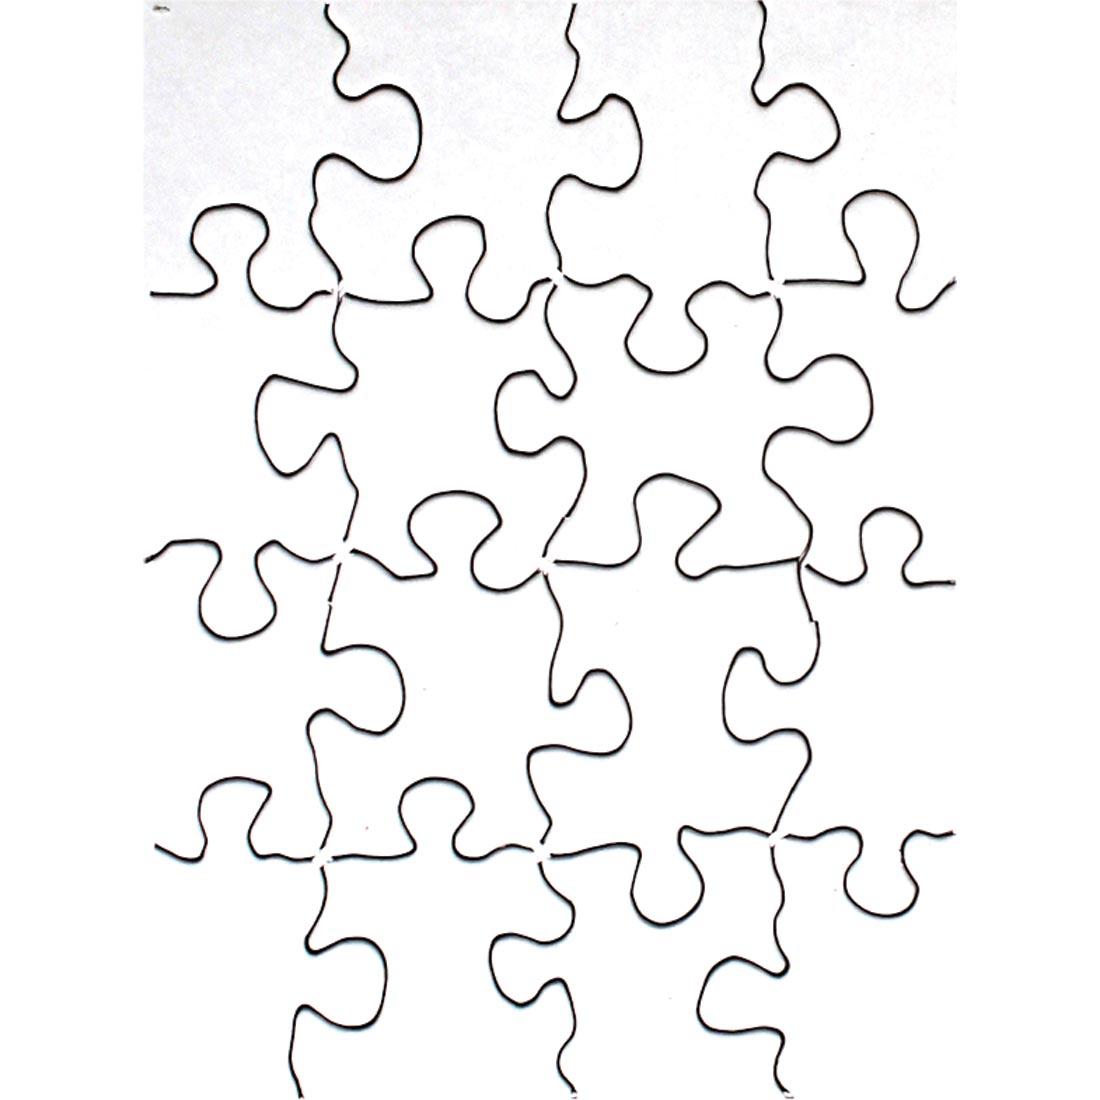 Blank Compoz-A-Puzzle 16-Piece Small Rectangle